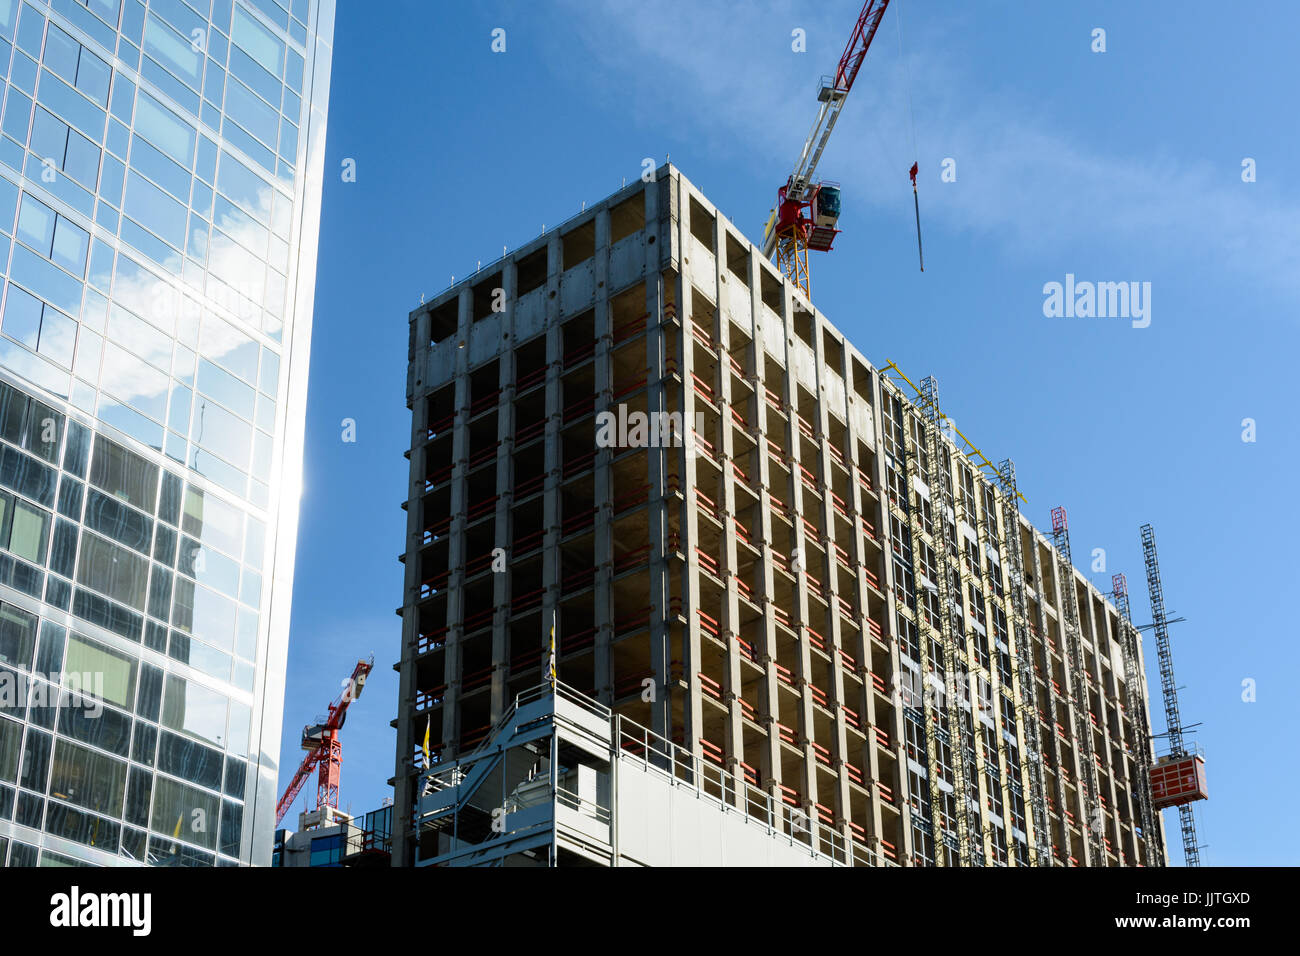 Low angle view of a concrete building under construction next to a glass building with two tower cranes against blue sky. Stock Photo